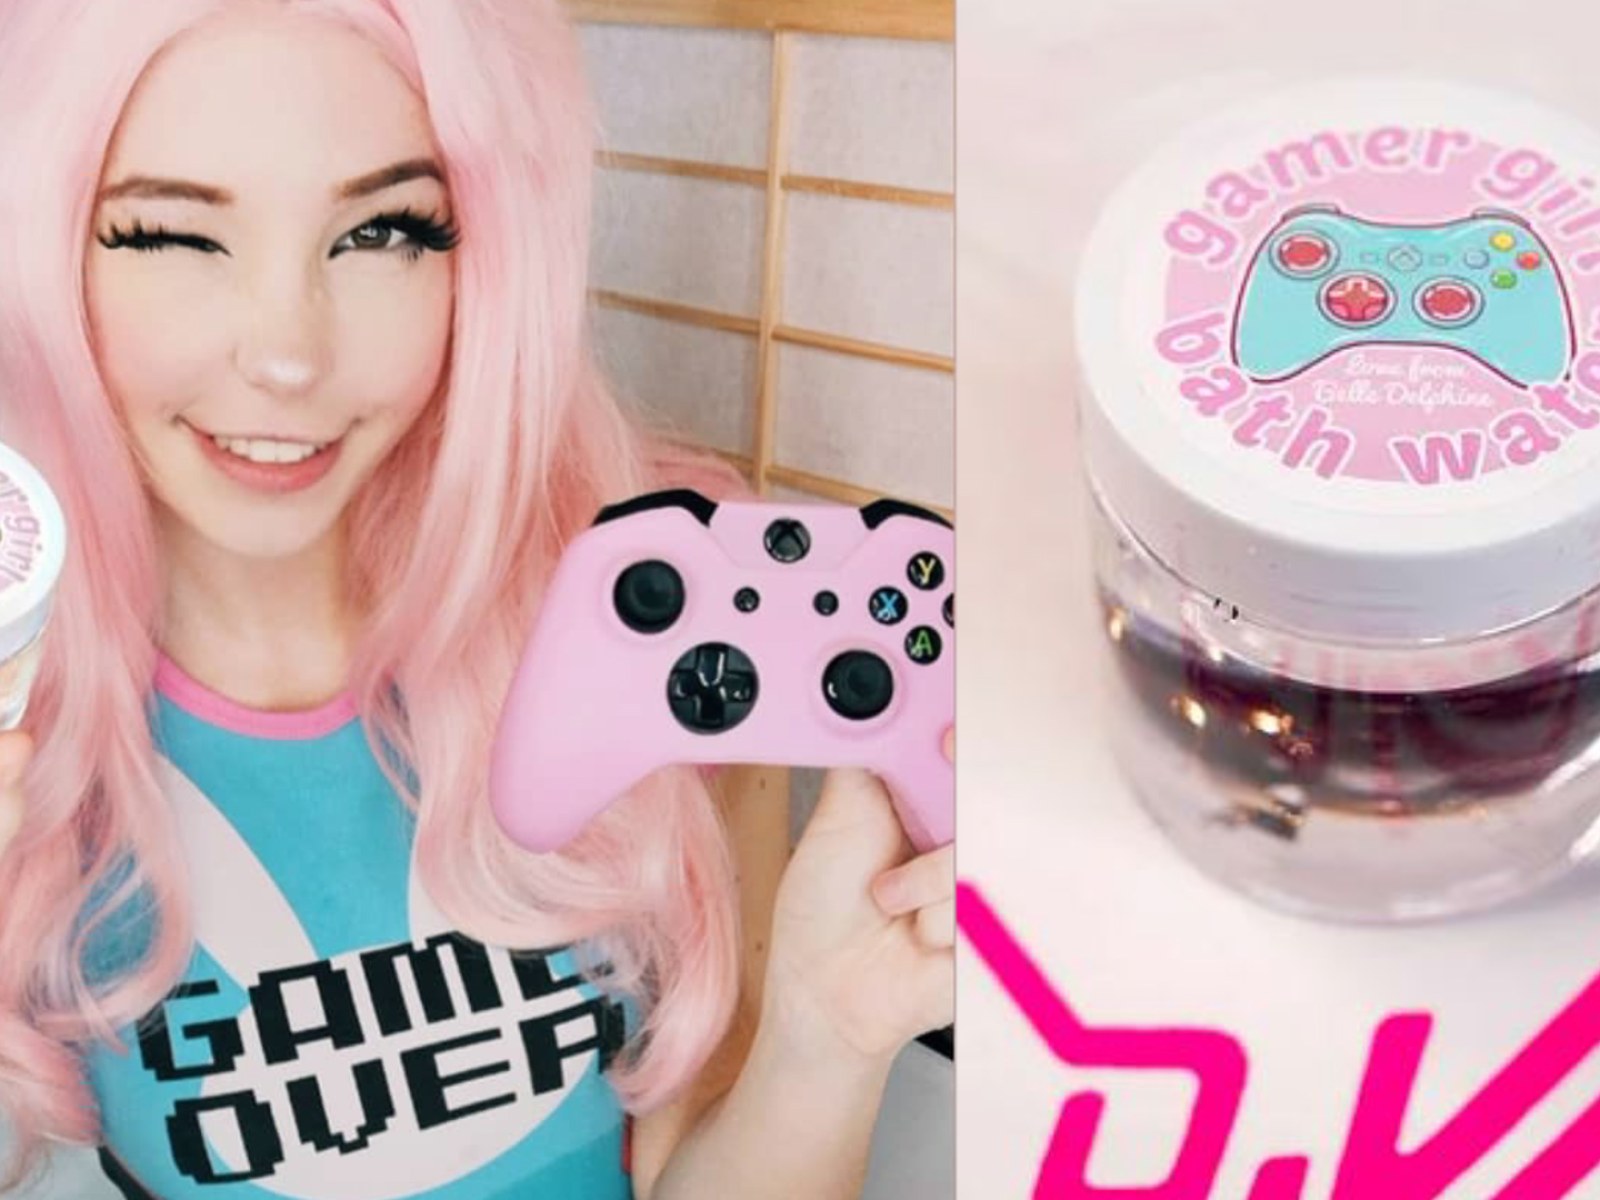 Belle Delphine Has A New Instagram Account. The Cosplay Stars